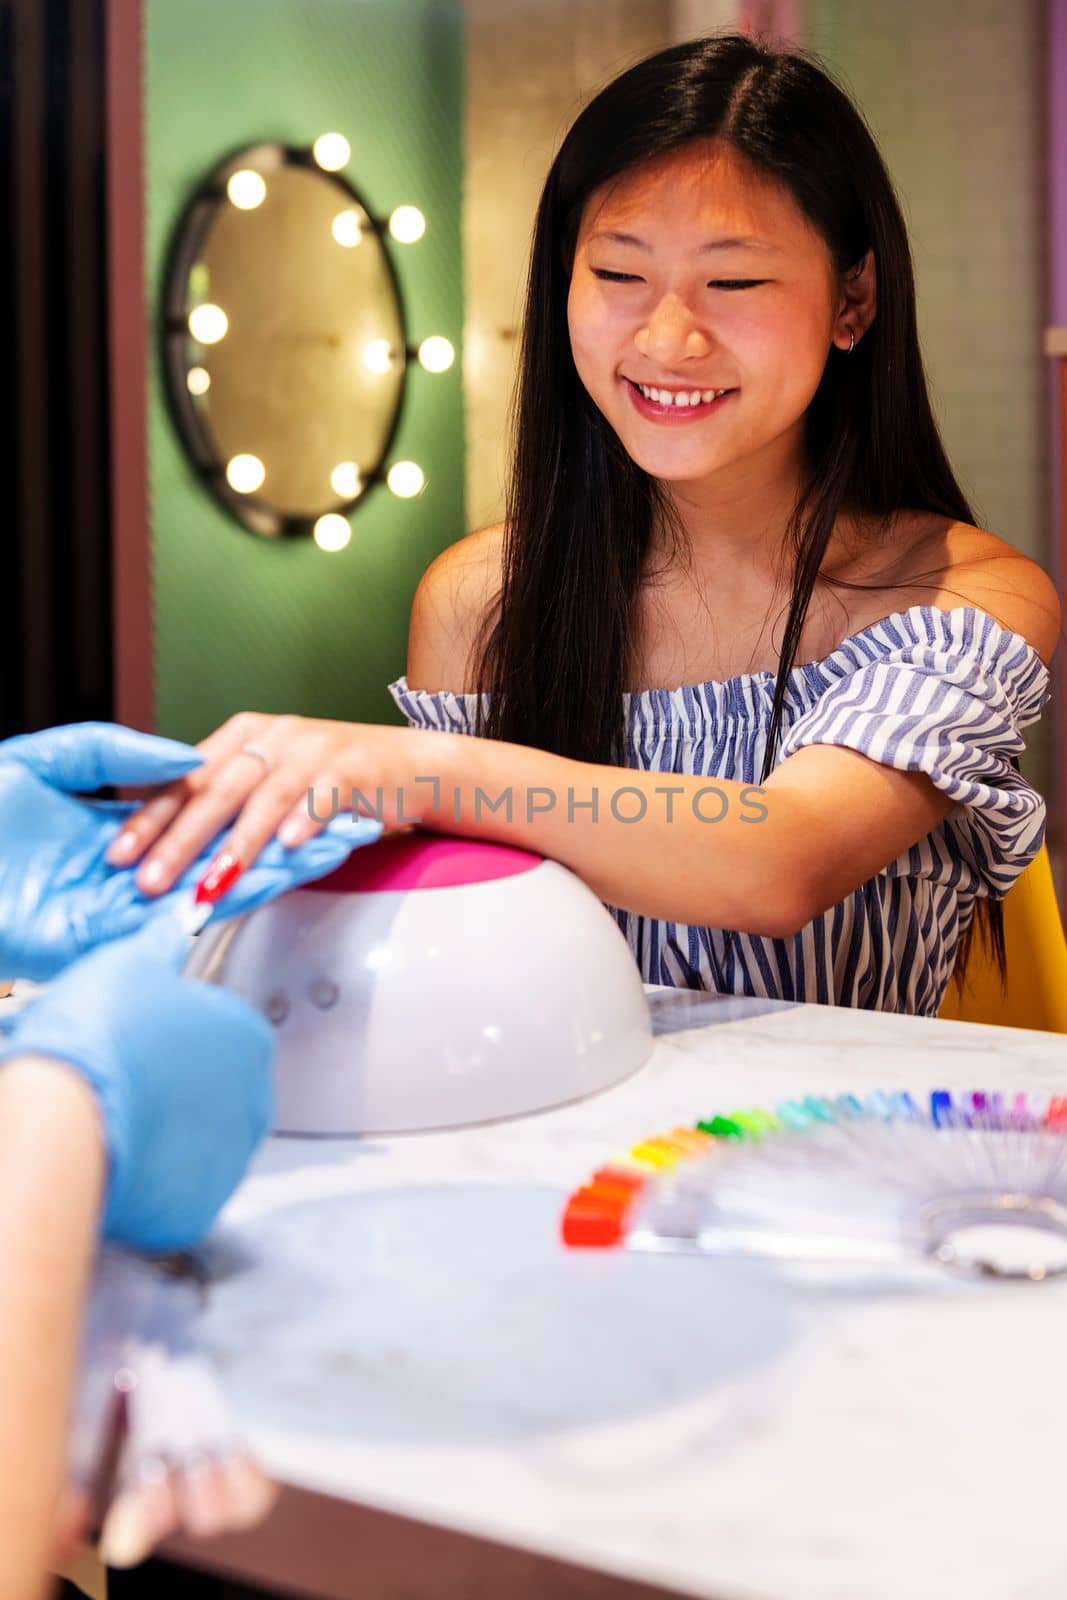 beautiful asian woman trying on nail polish colors during a manicure treatment at the beauty salon, wellness and body care concept